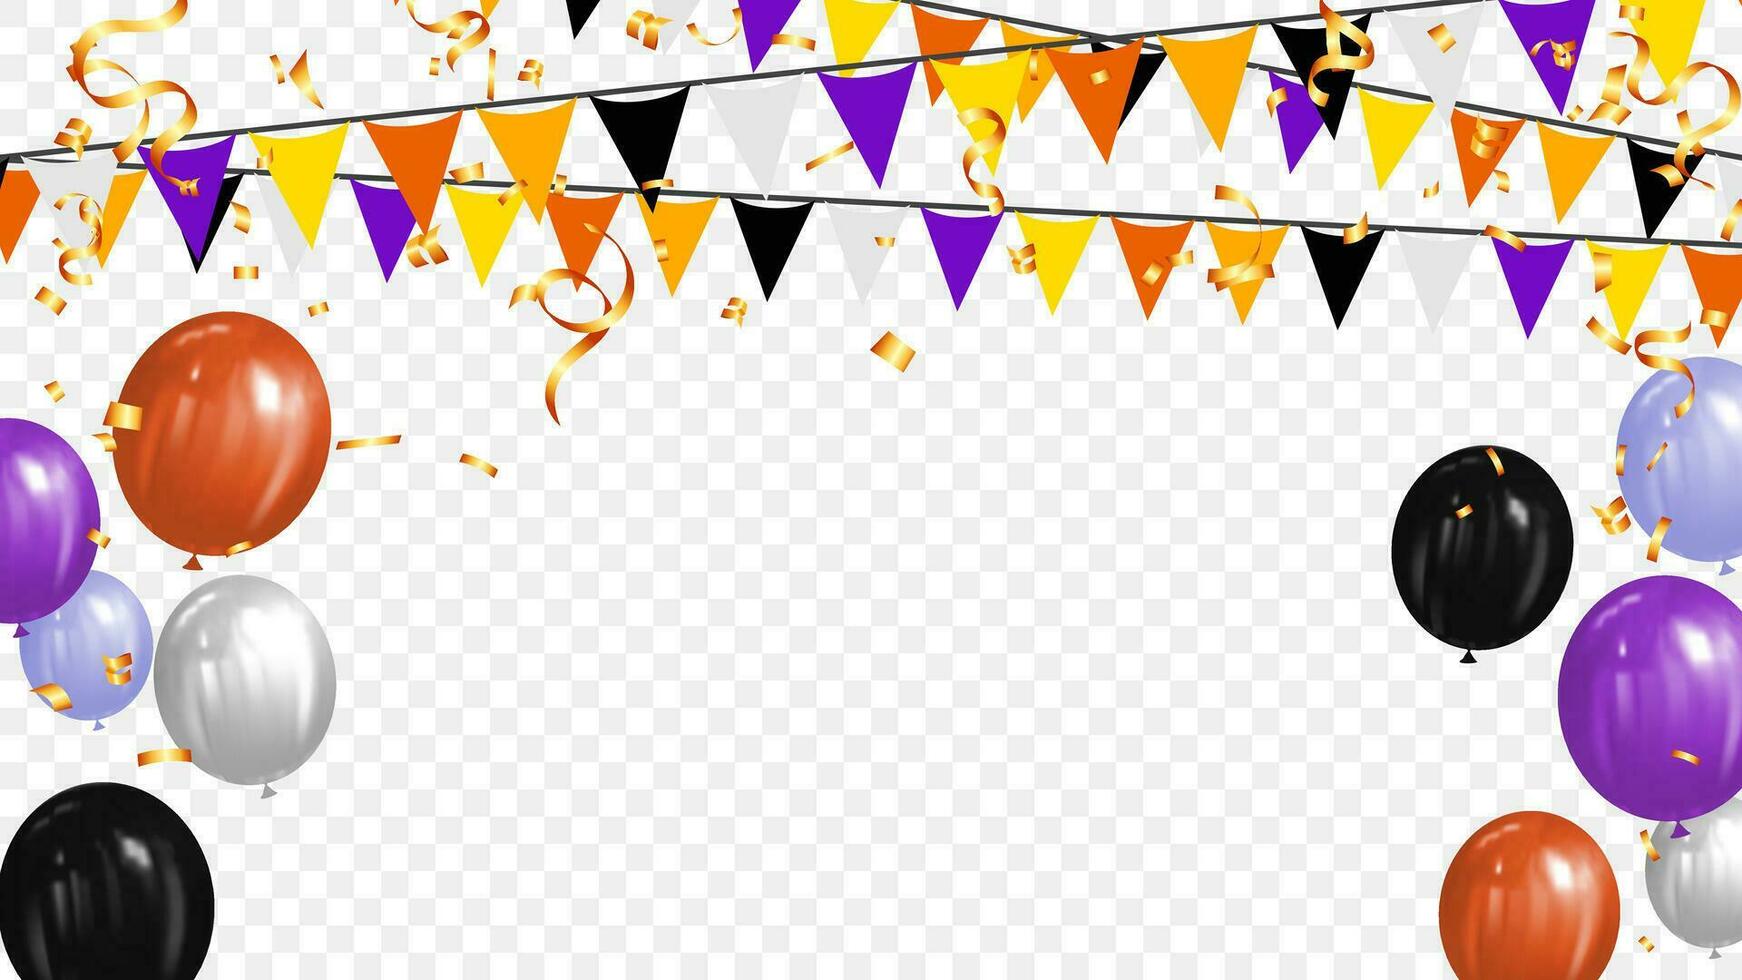 halloween party flags, balloon and confetti background. vector illustration